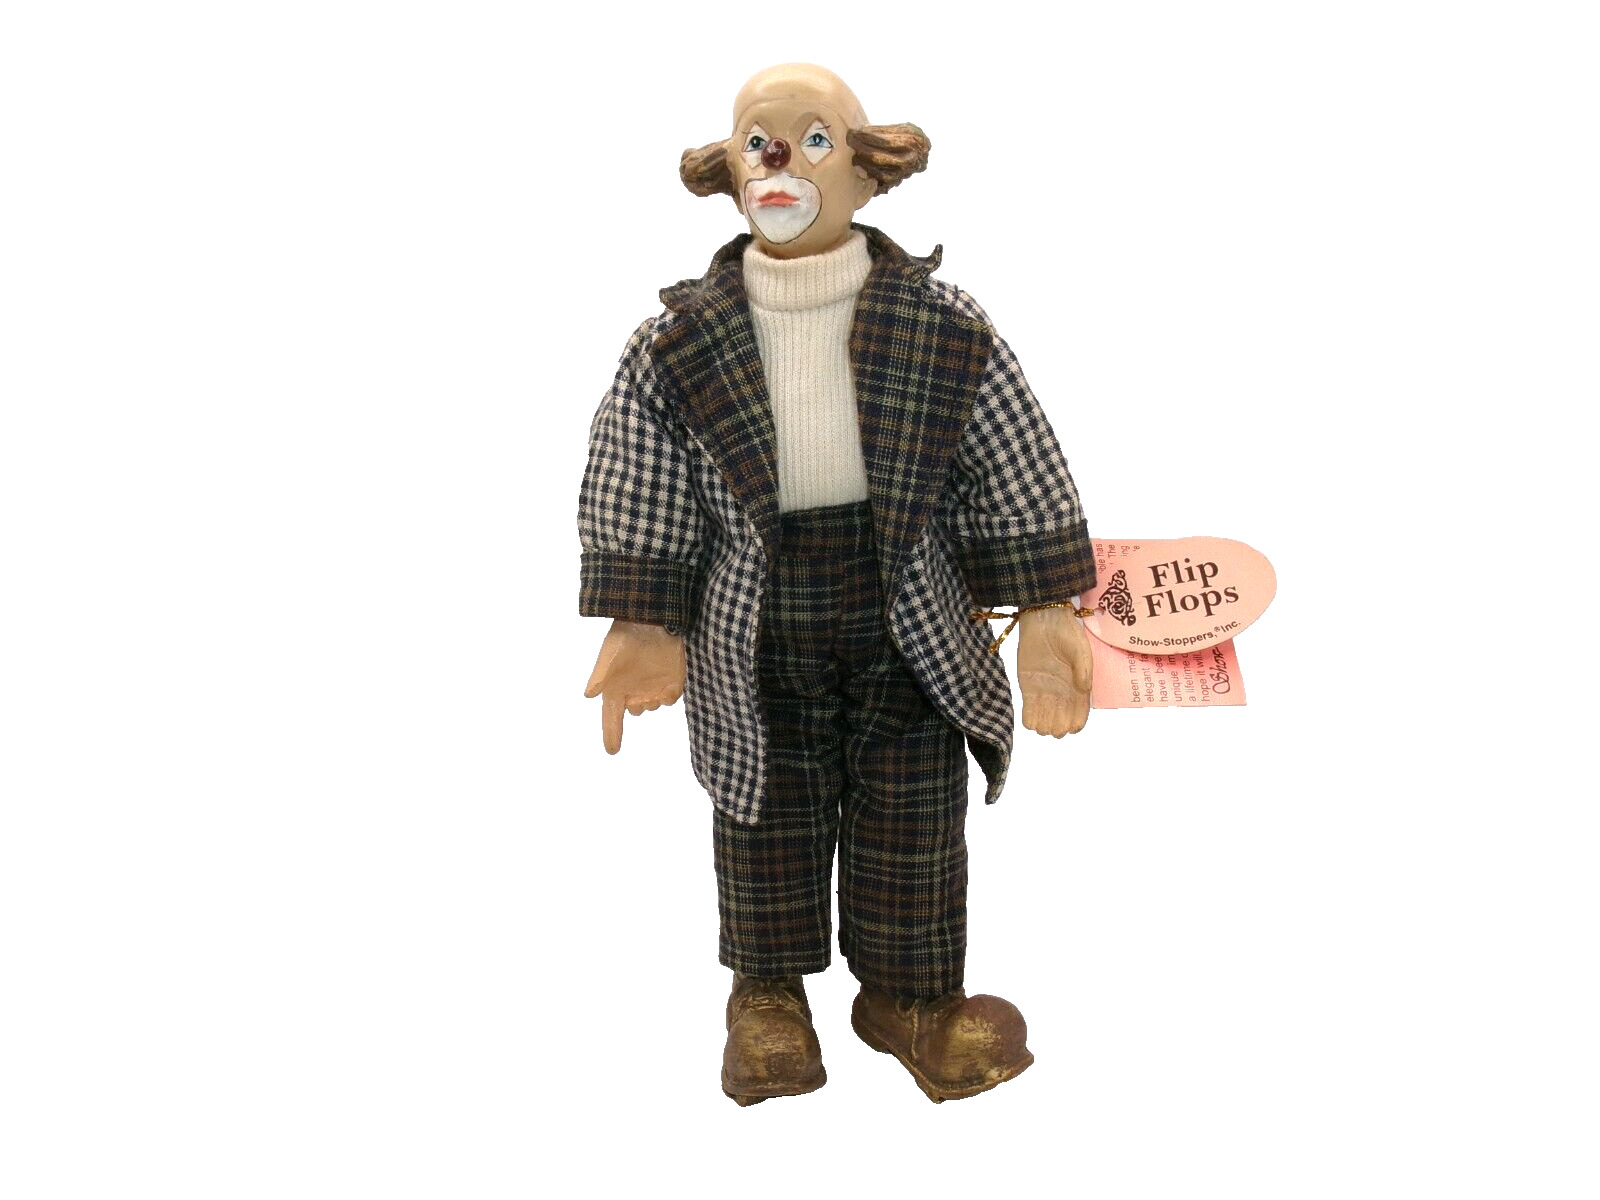 Show-Stoppers Hobo Clown Doll Flip Flops Poseable Arms & Legs 10 inches Tall